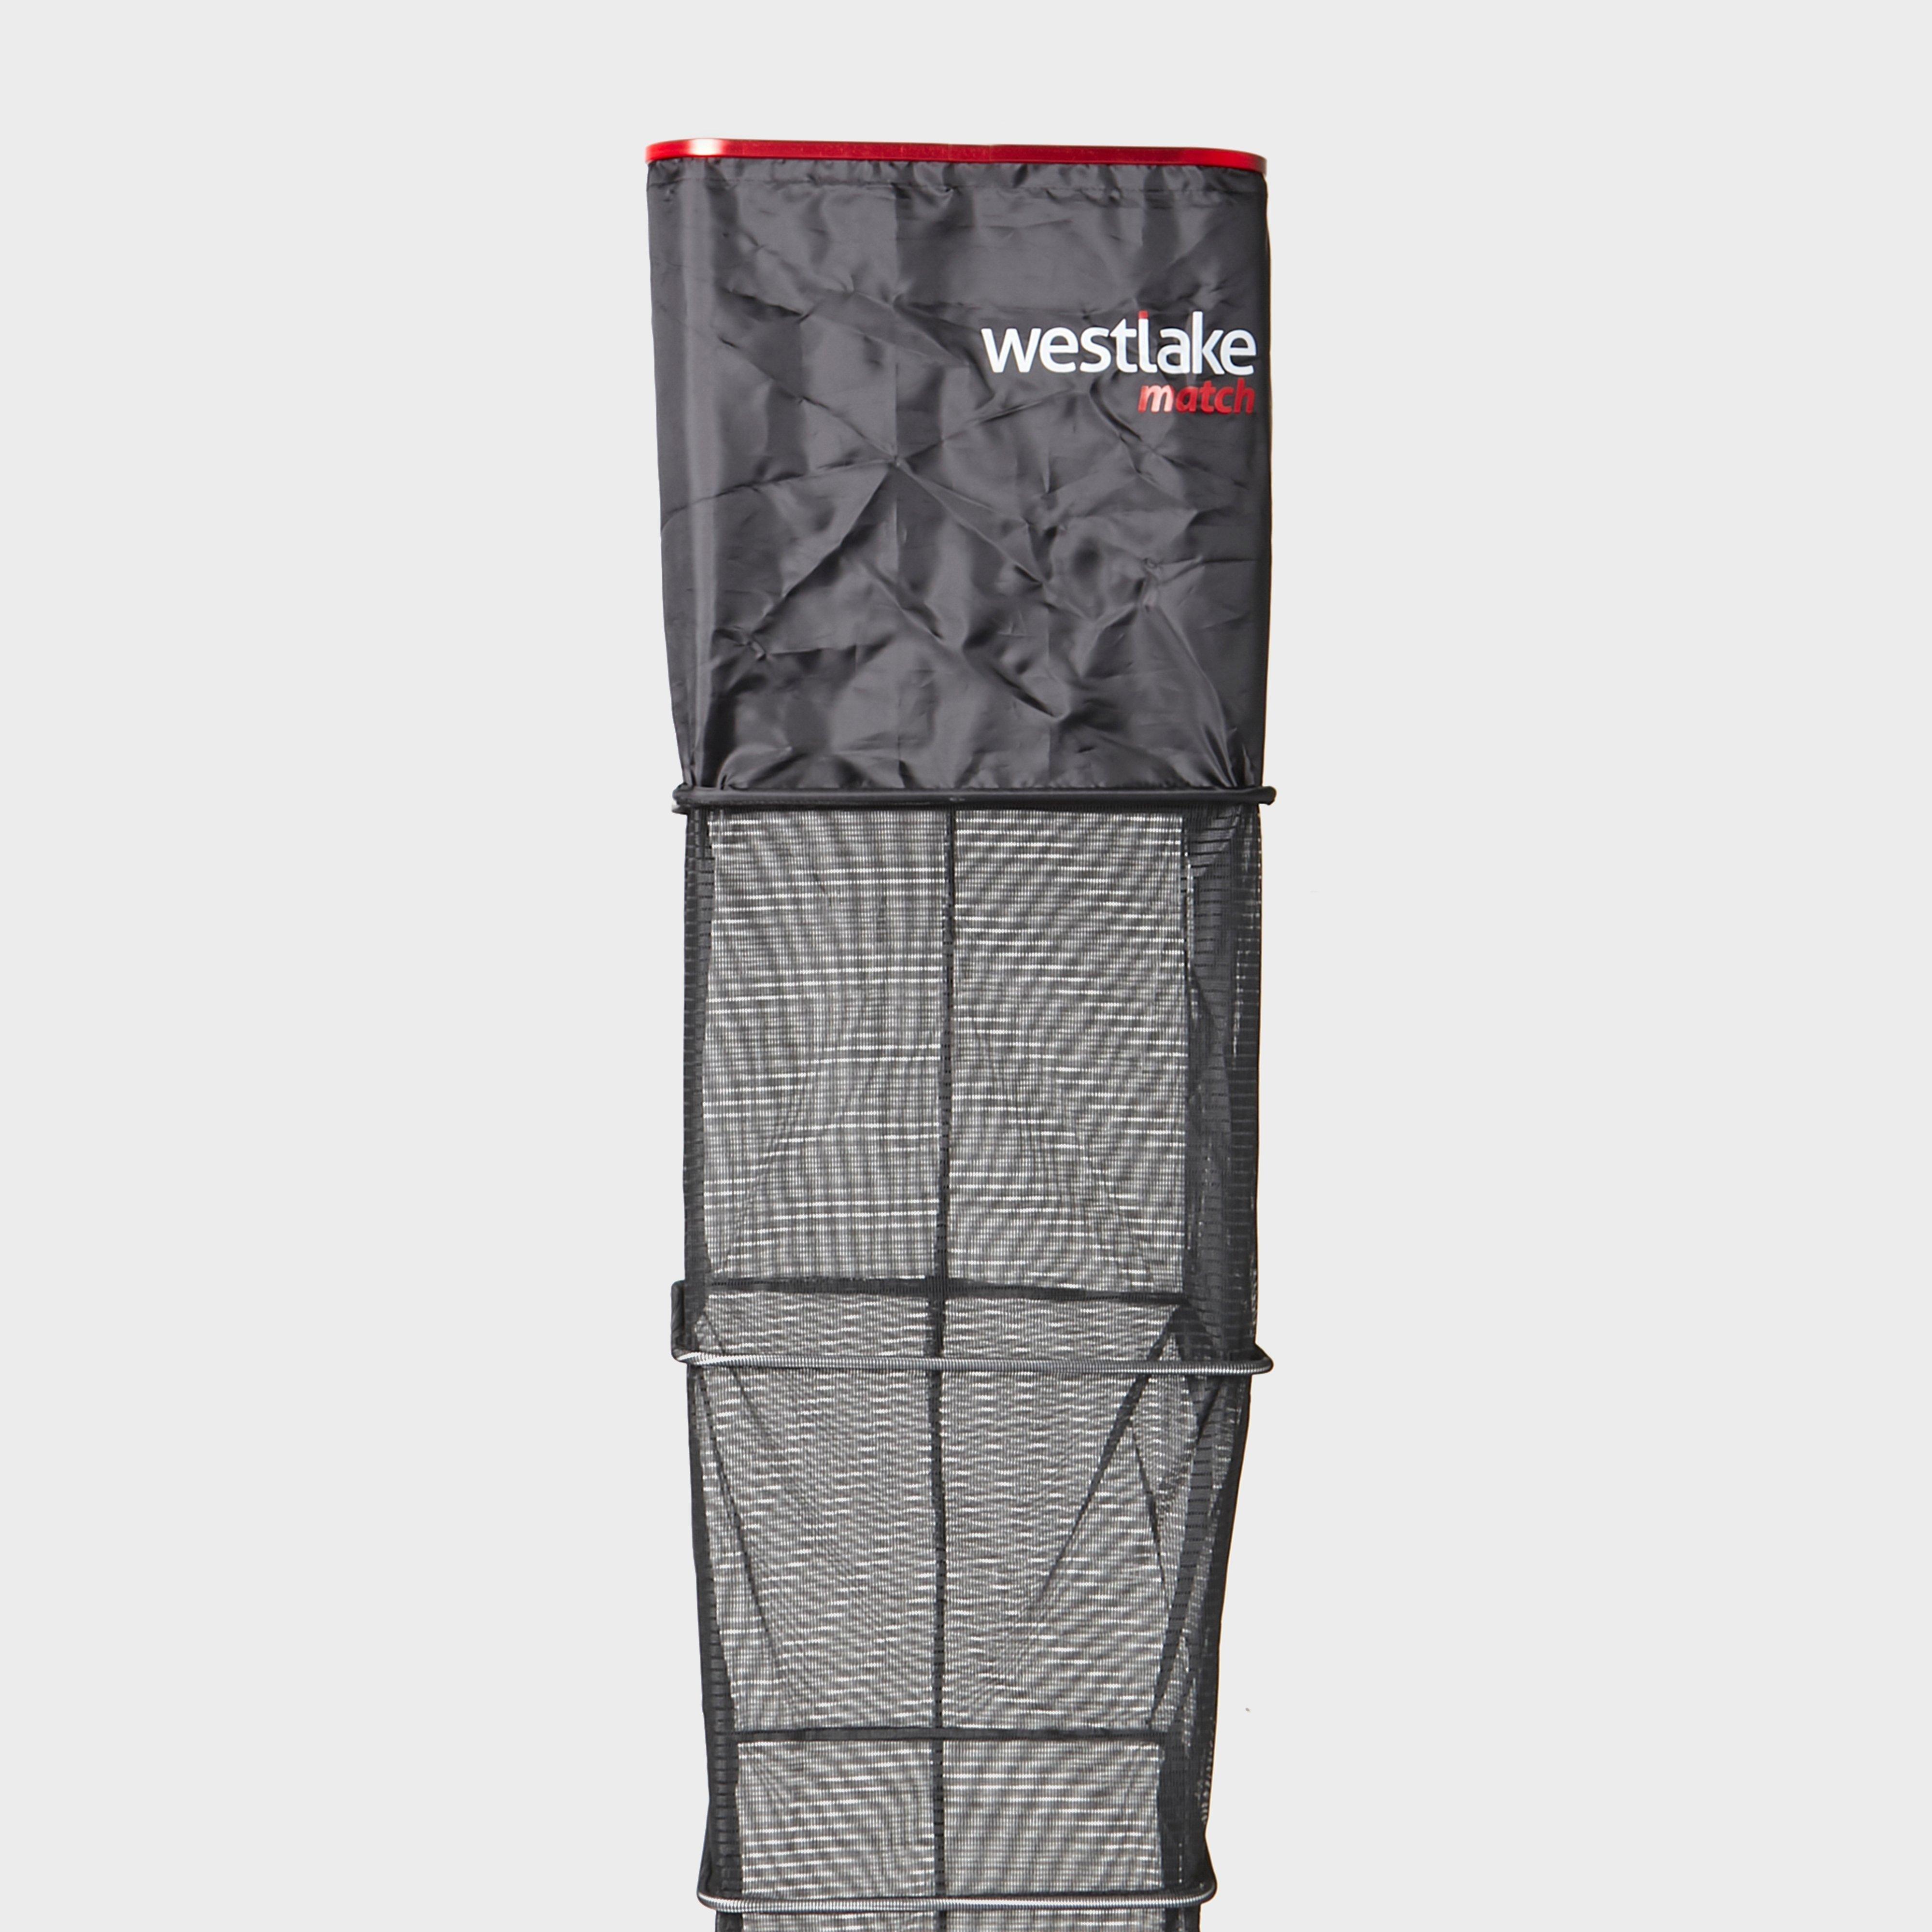 Westlake Commercial Keepnet 3M Review